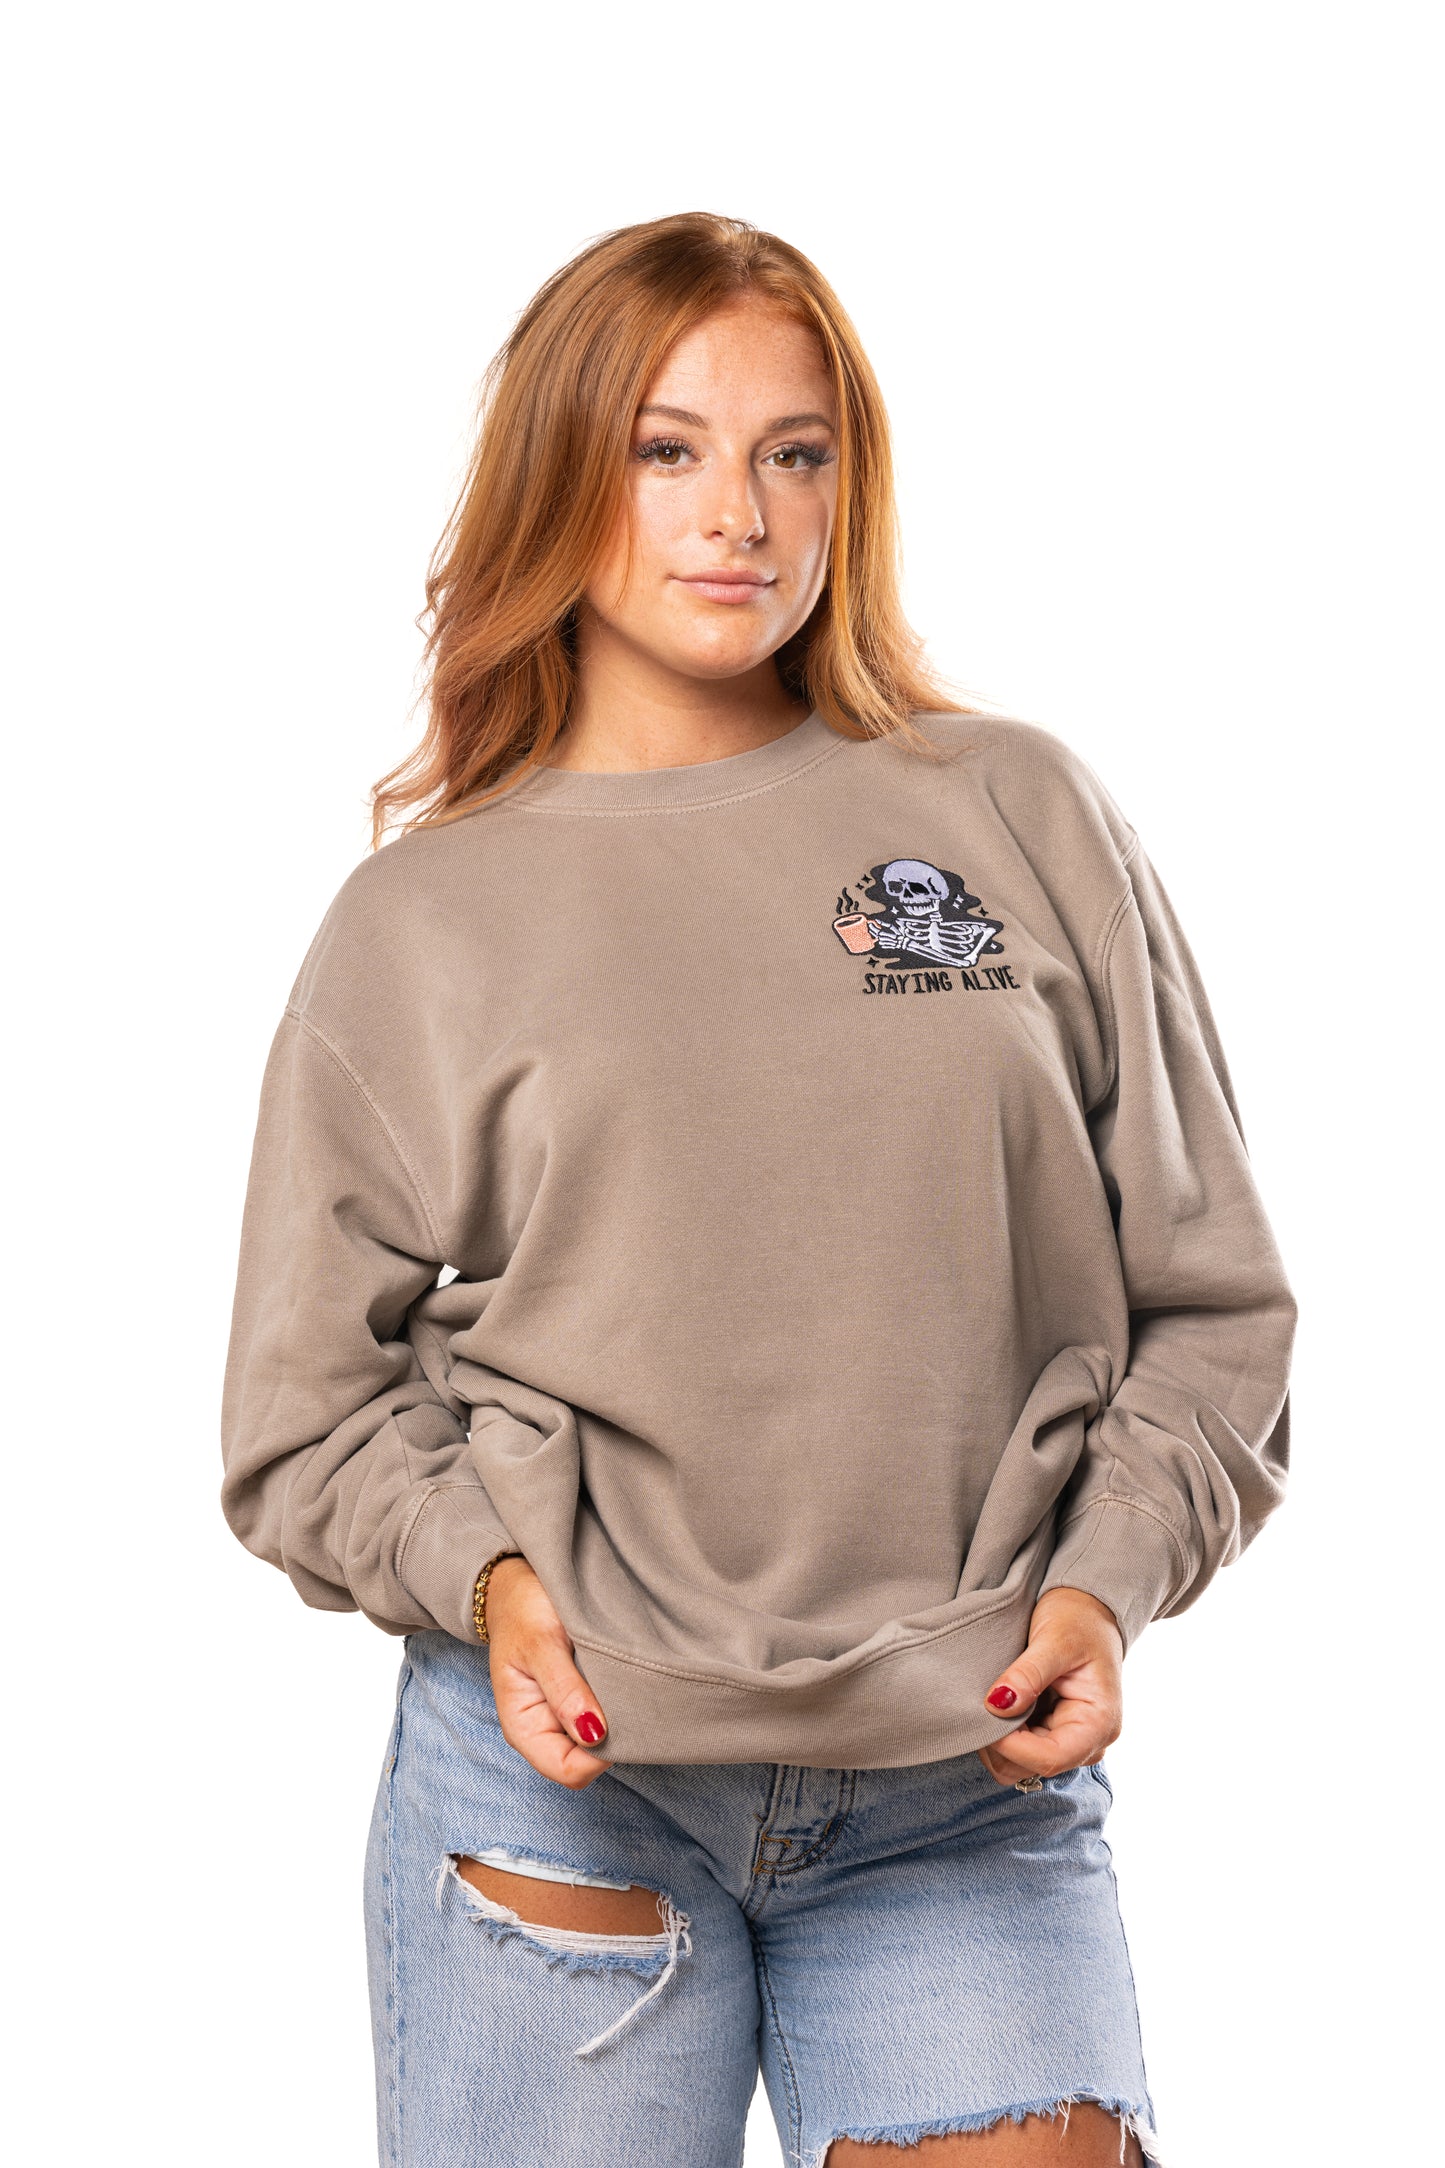 Staying Alive - Embroidered Sweatshirt (Cement)